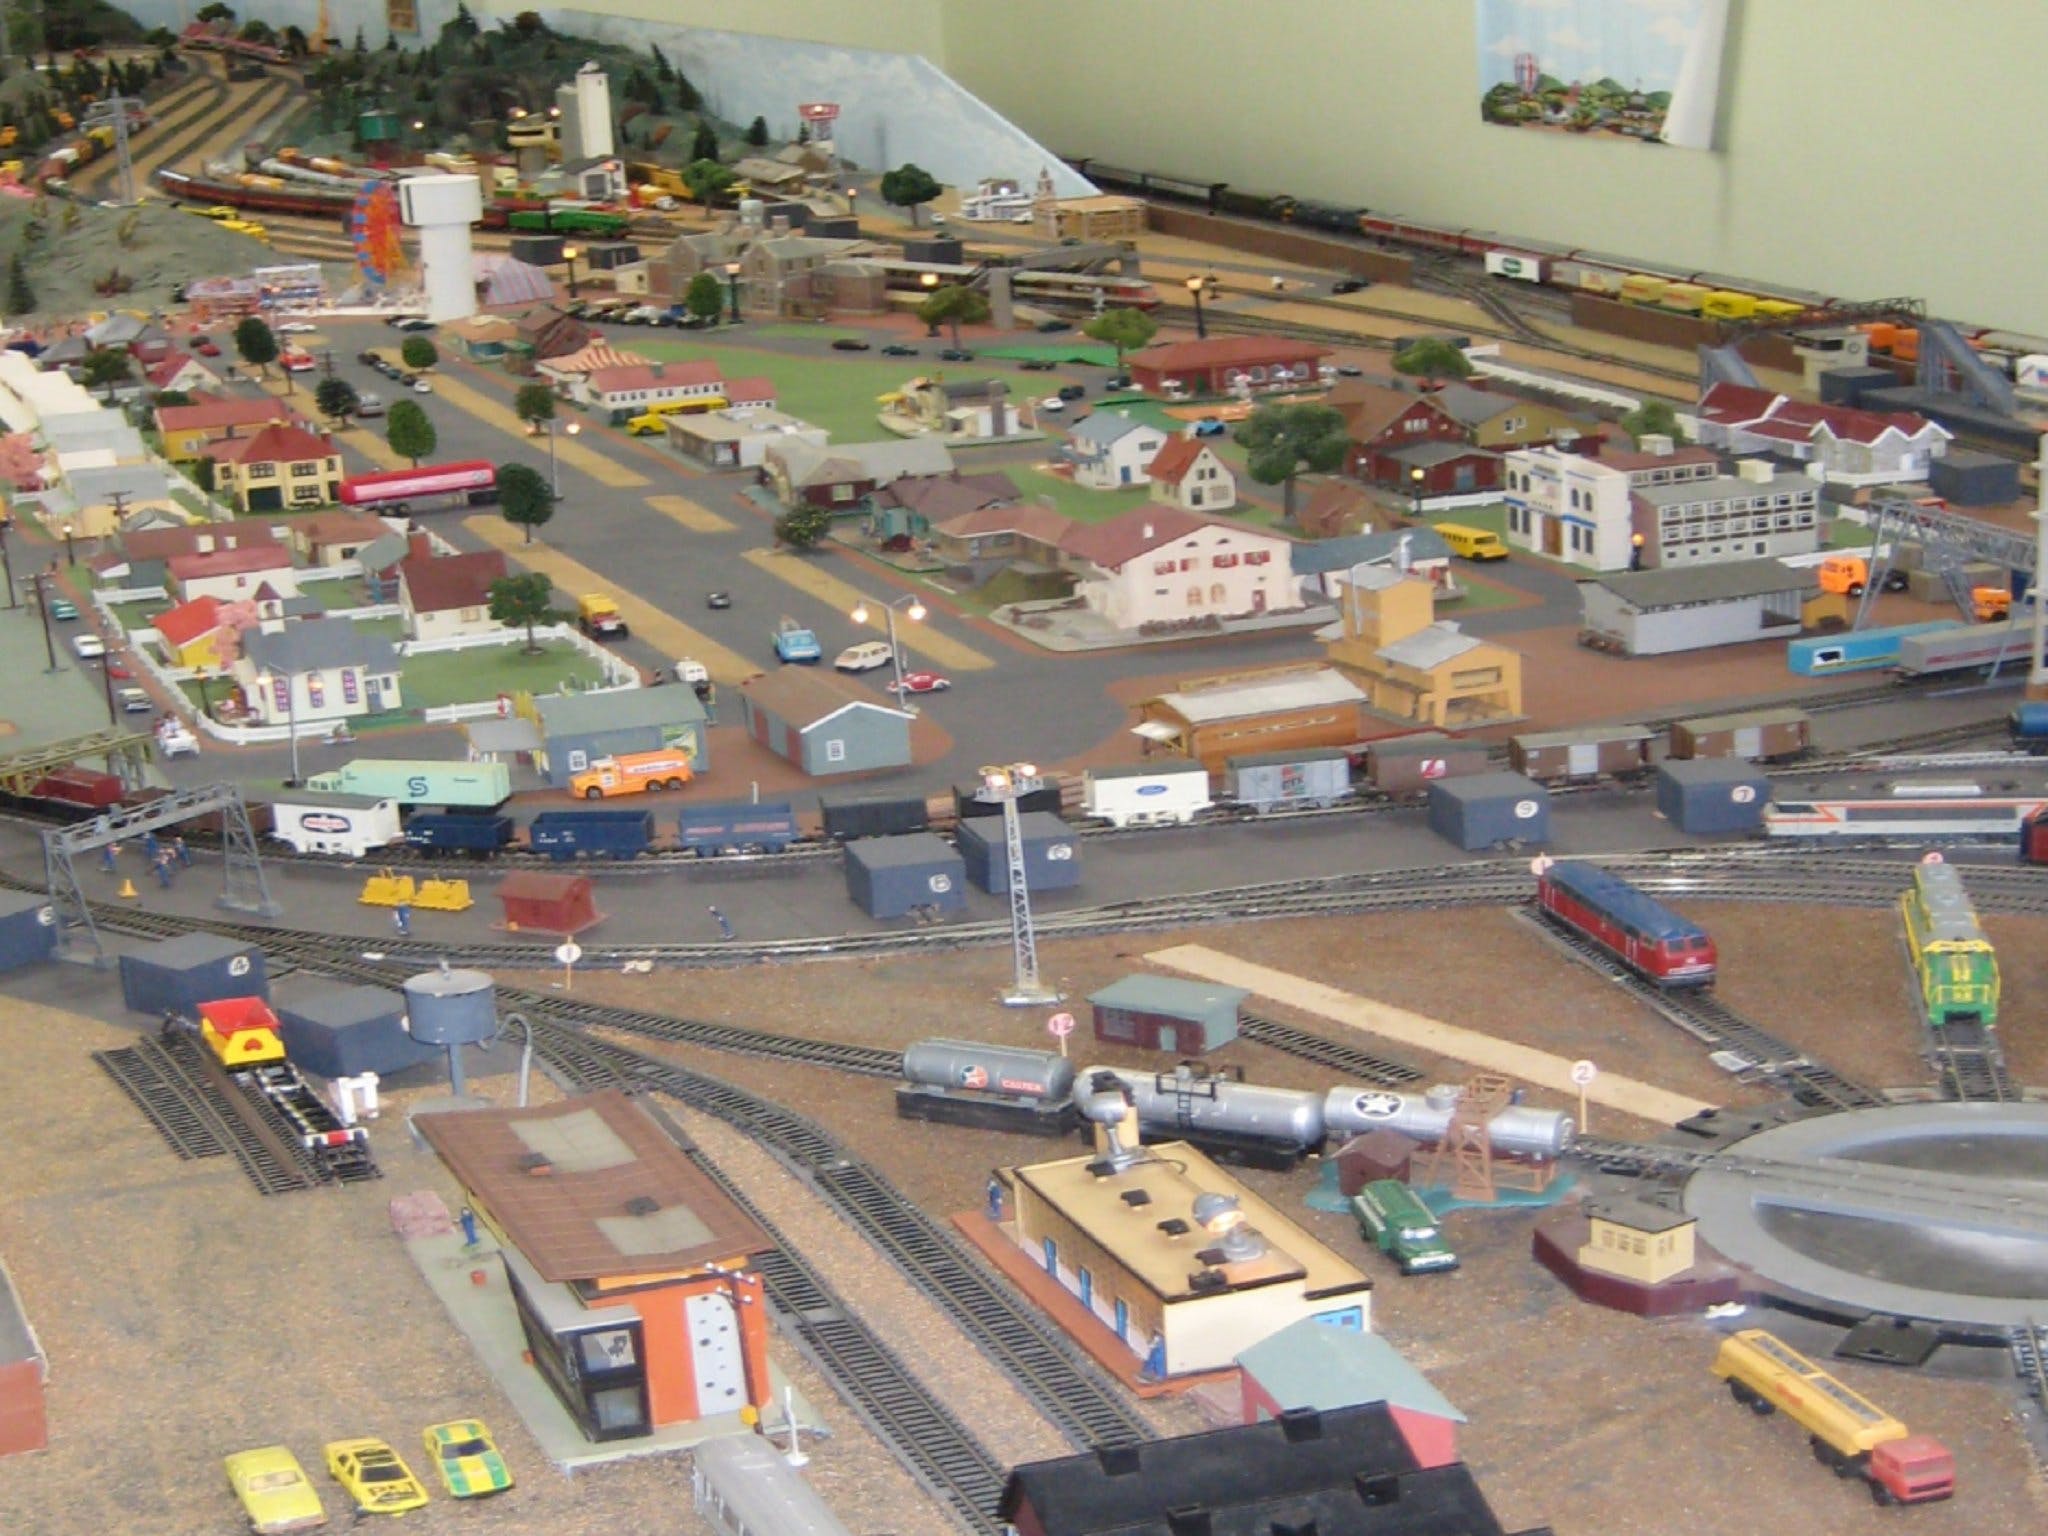 Heywood Model Trains - Redcliffe Tourism